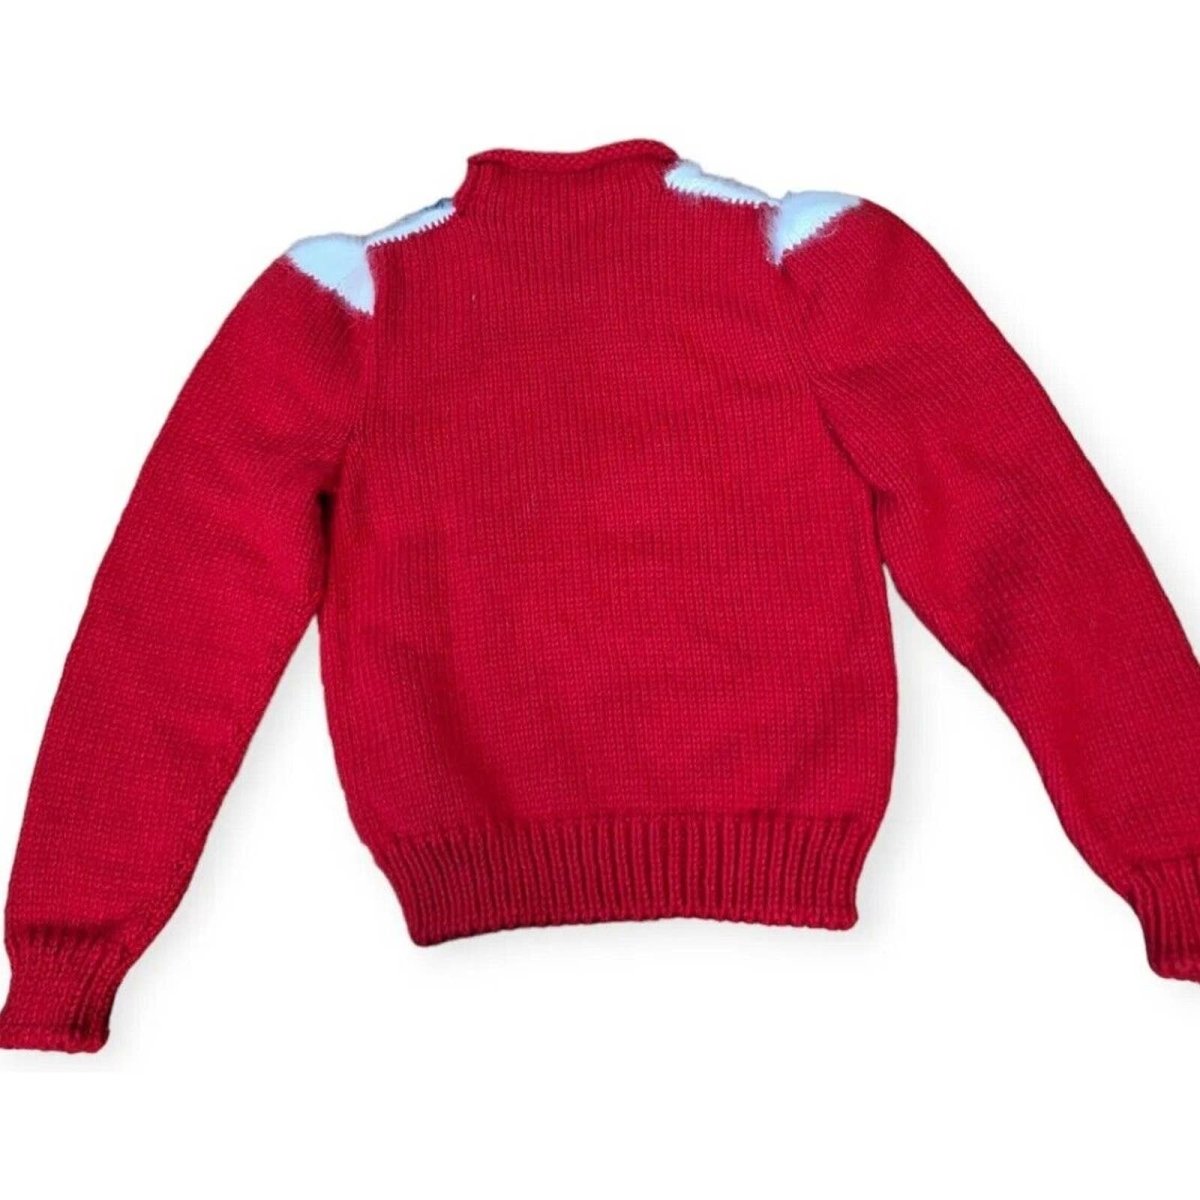 Vintage 80s Kids Heart Sweater Size 8/10 Angora, Puff Sleeves - themallvintage The Mall Vintage